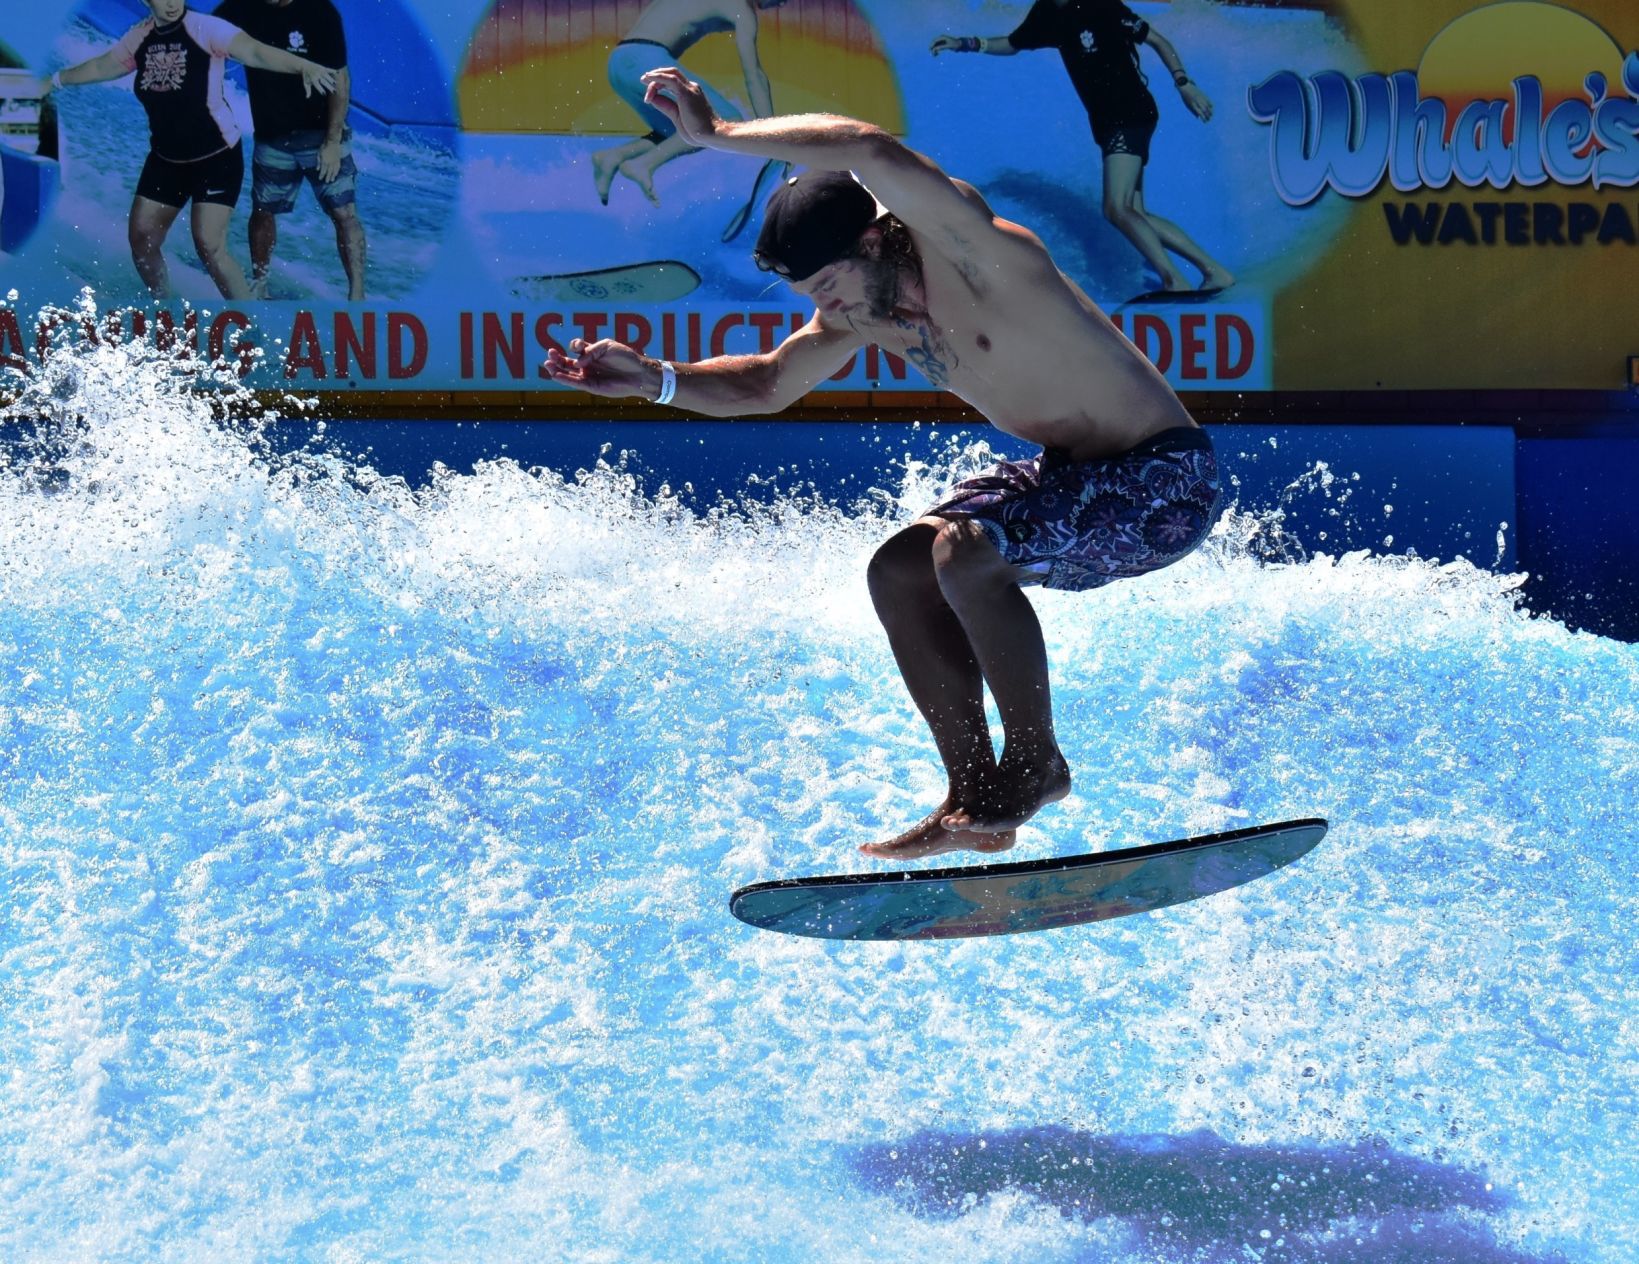 Flowriders flock to Whales Tale Waterpark for wave-riding event Attractions unionleader photo